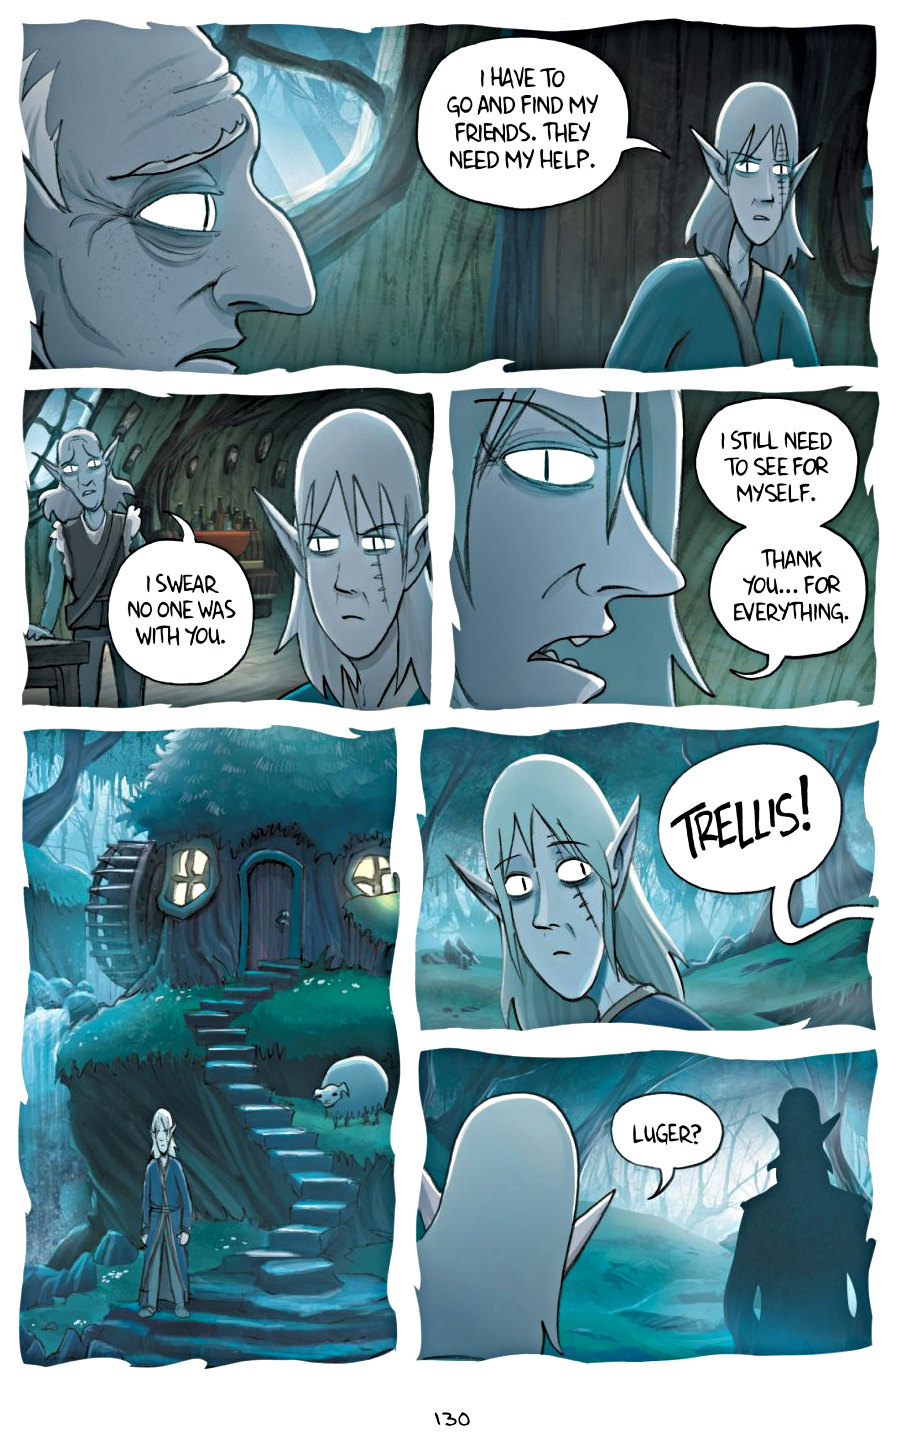 page 130 of amulet 5 prince of the elves graphic novel